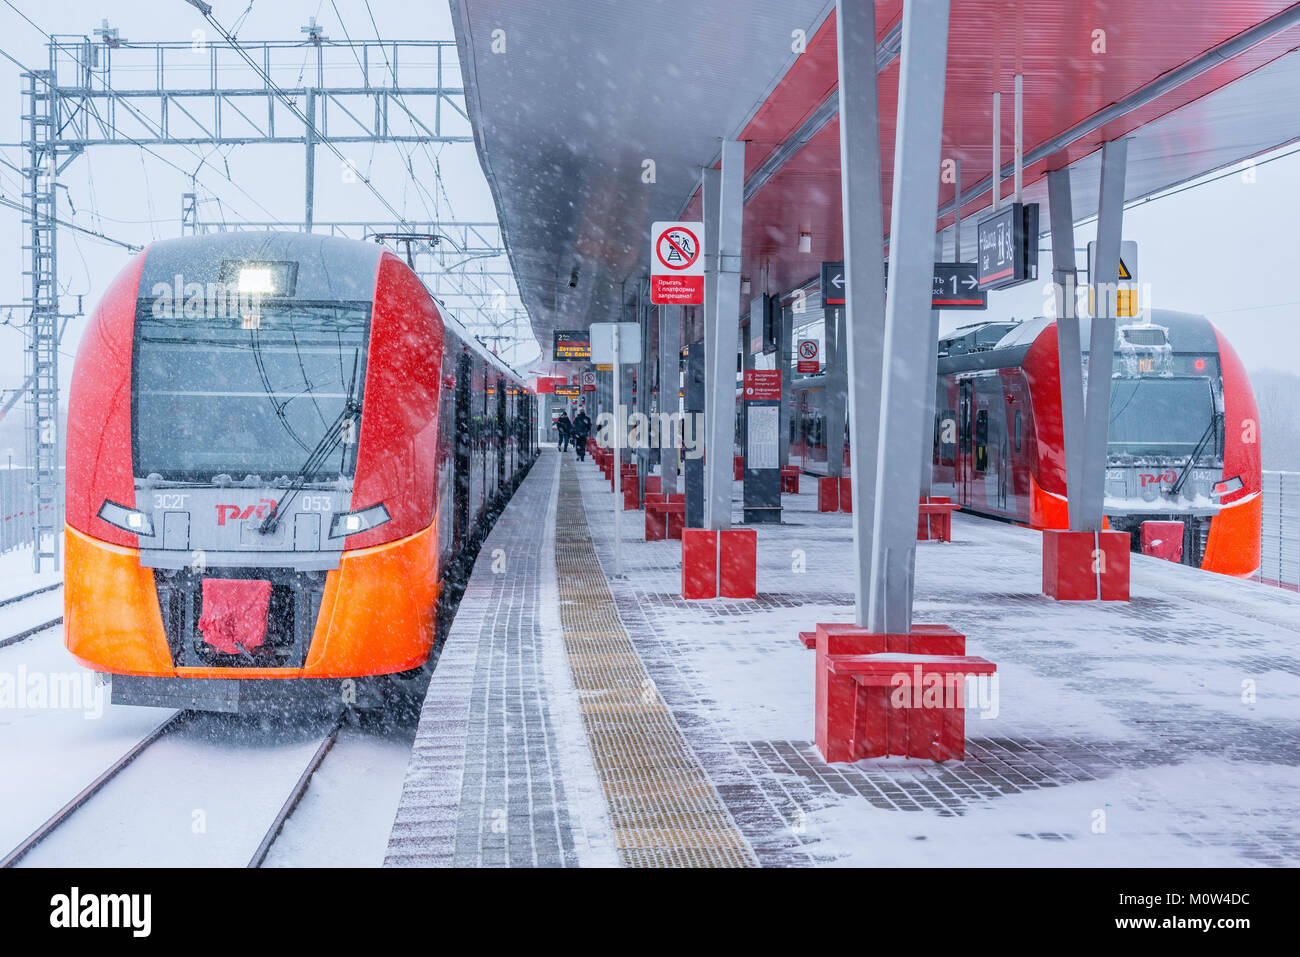 Moscow, Russia - January 20, 2018: Highspeed trains stand by the Rostokino station platform at snowstormy day time. Stock Photo